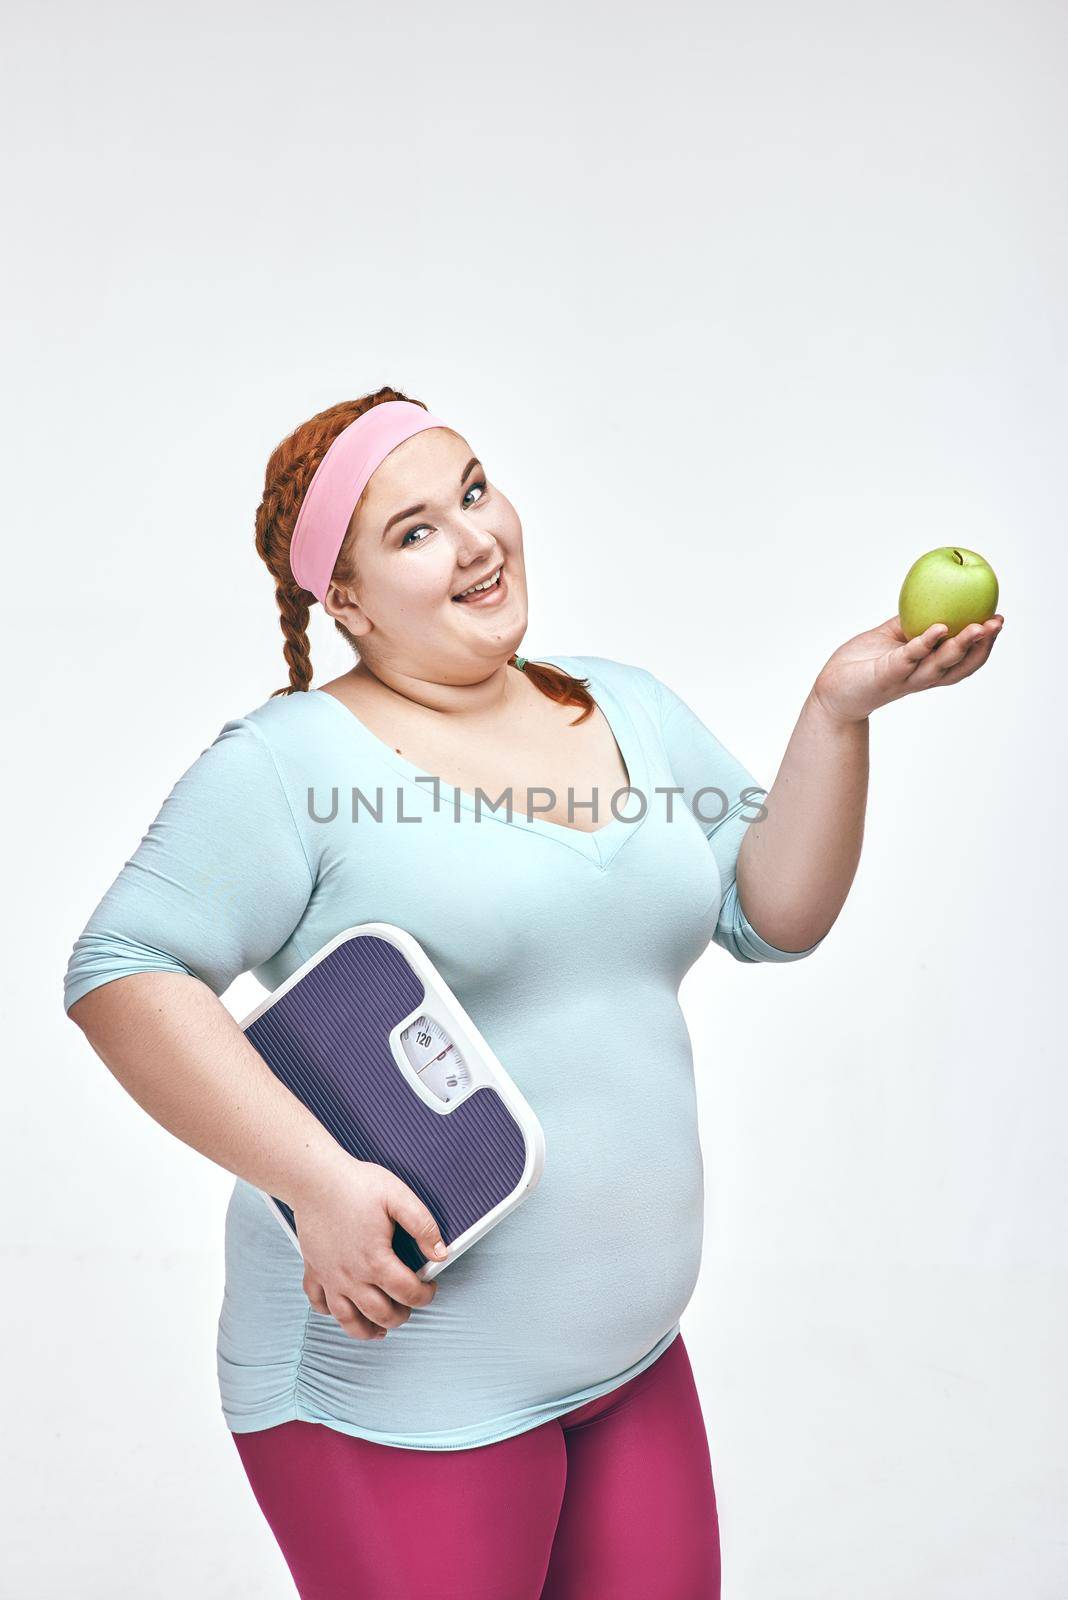 Funny picture of amusing, red haired, chubby woman on white background. Woman holding an apple and scales.